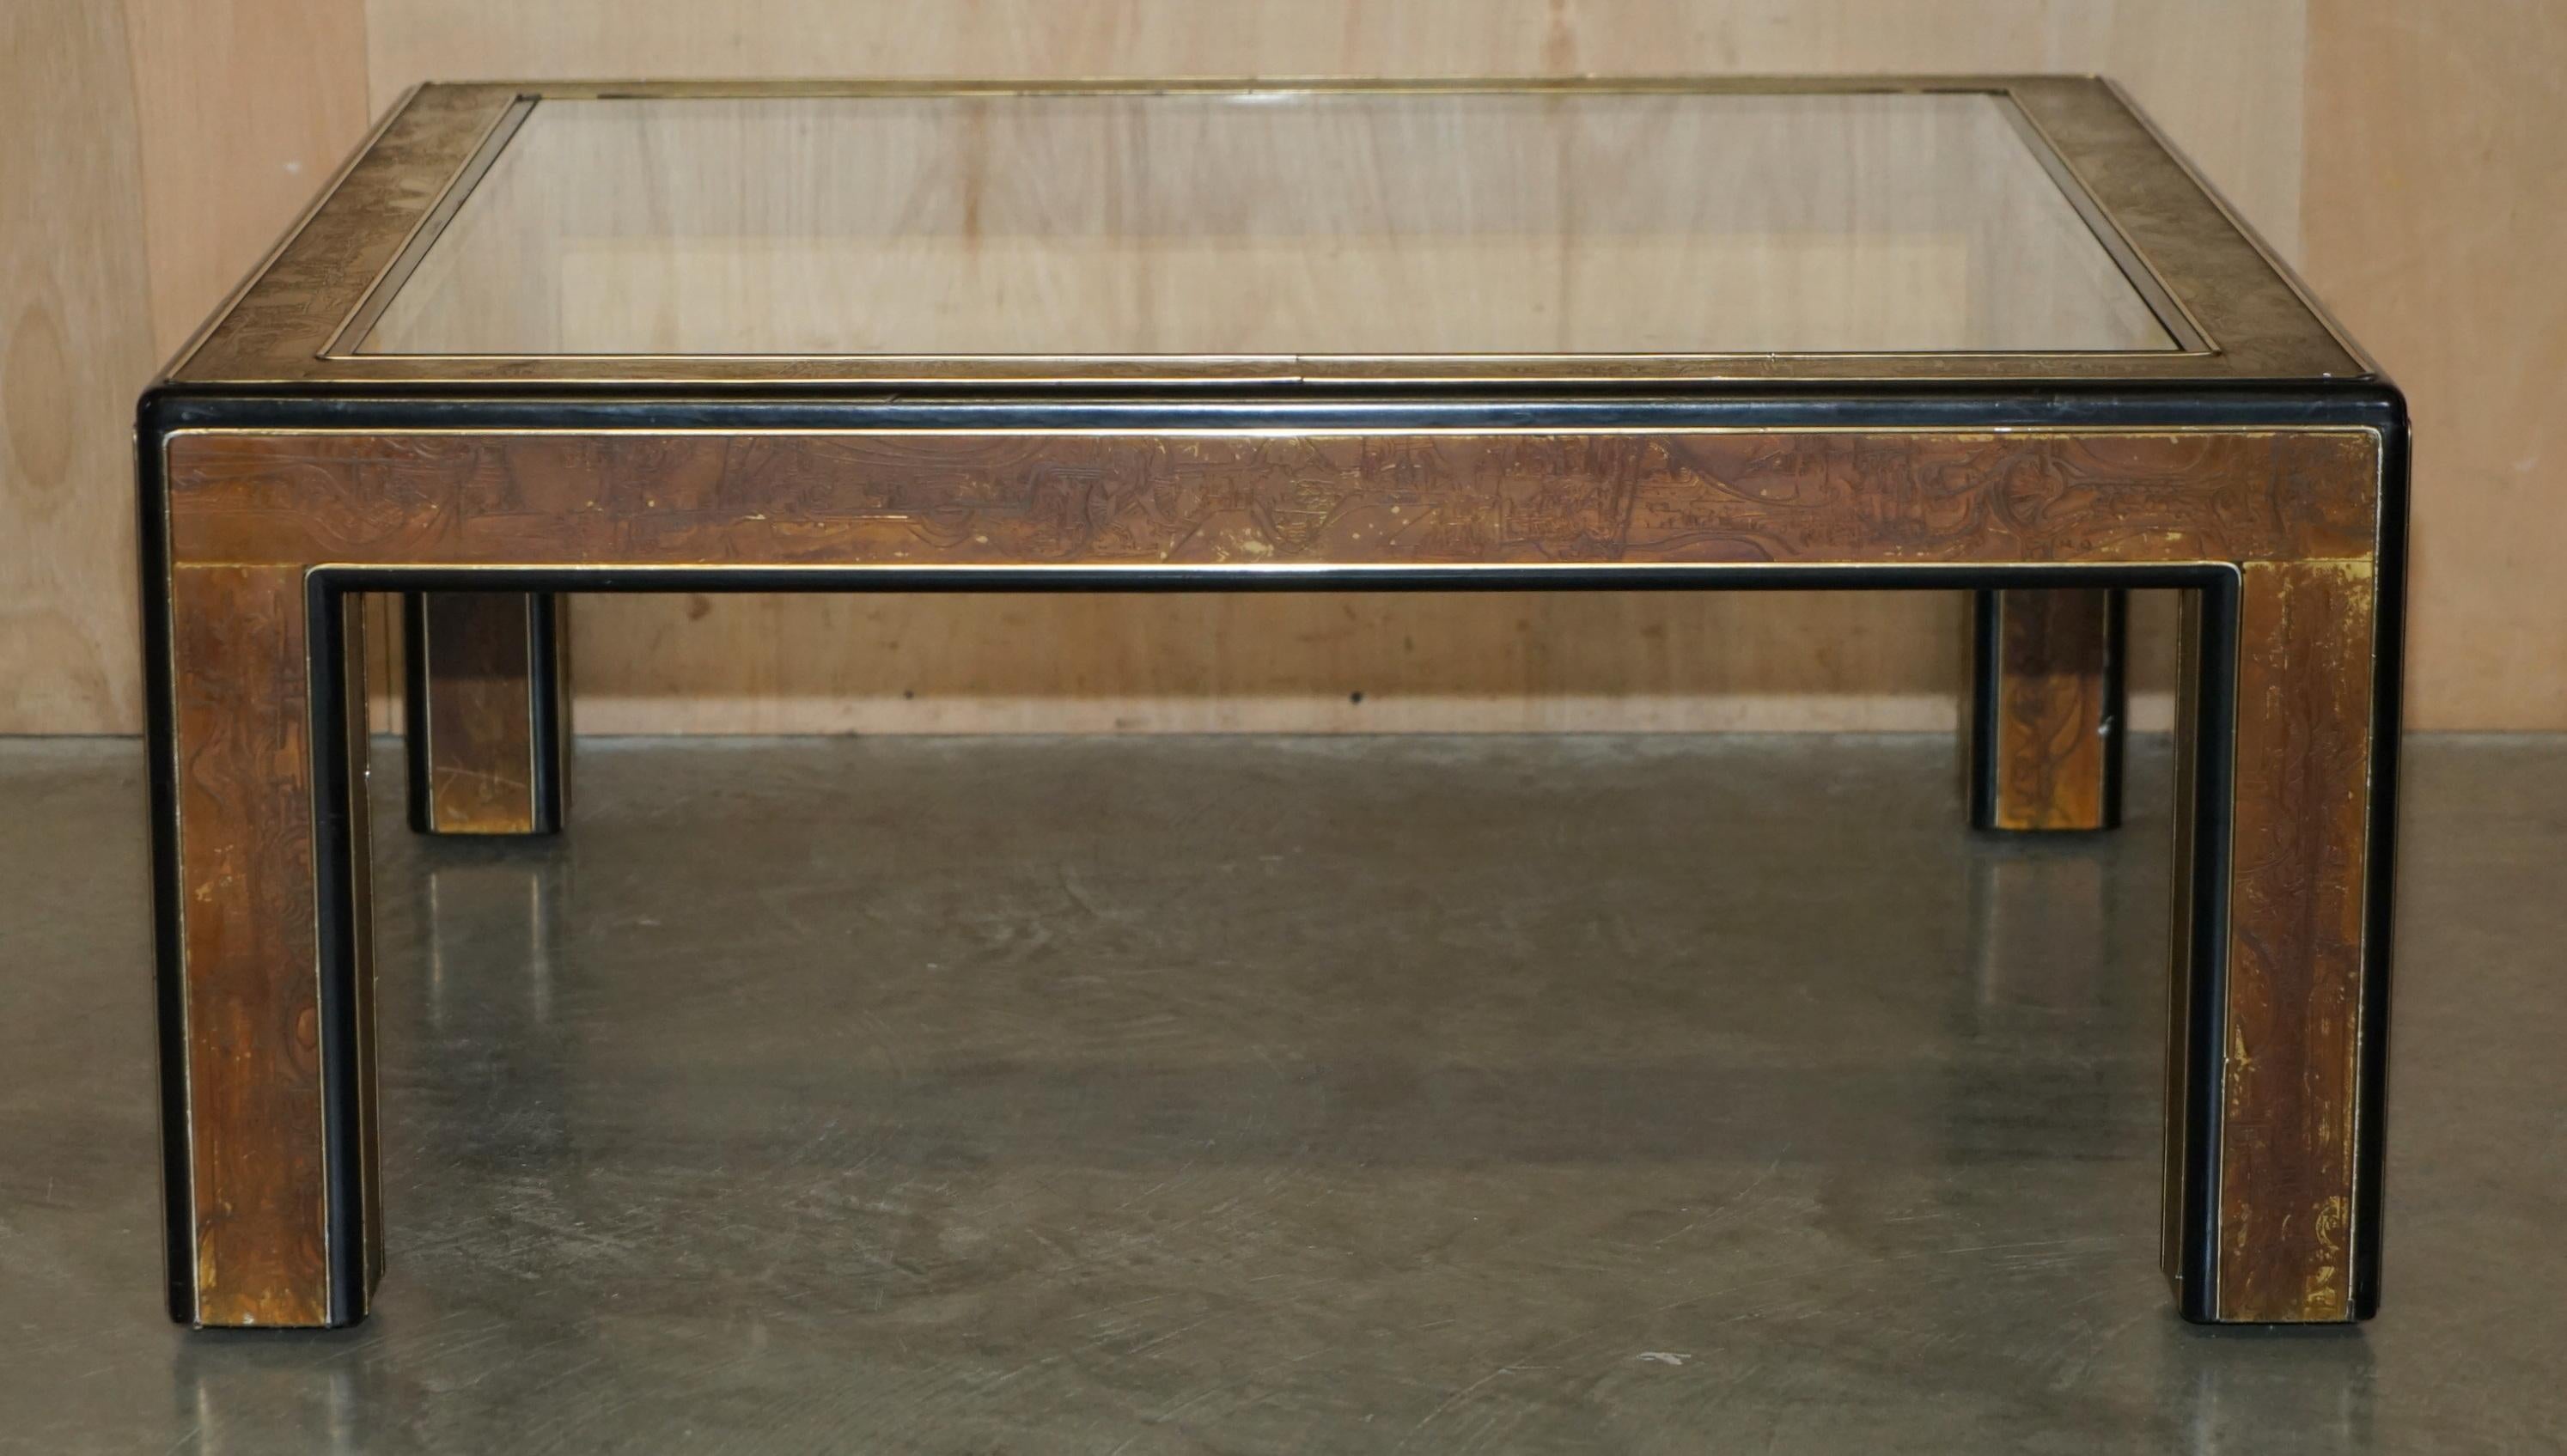 Royal House Antiques

Royal House Antiques is delighted to offer for sale this Mid-Century Modern Bernhard Rohne for Mastercraft Acid Etched drinks coffee table.

Please note the delivery fee listed is just a guide, it covers within the M25 only for